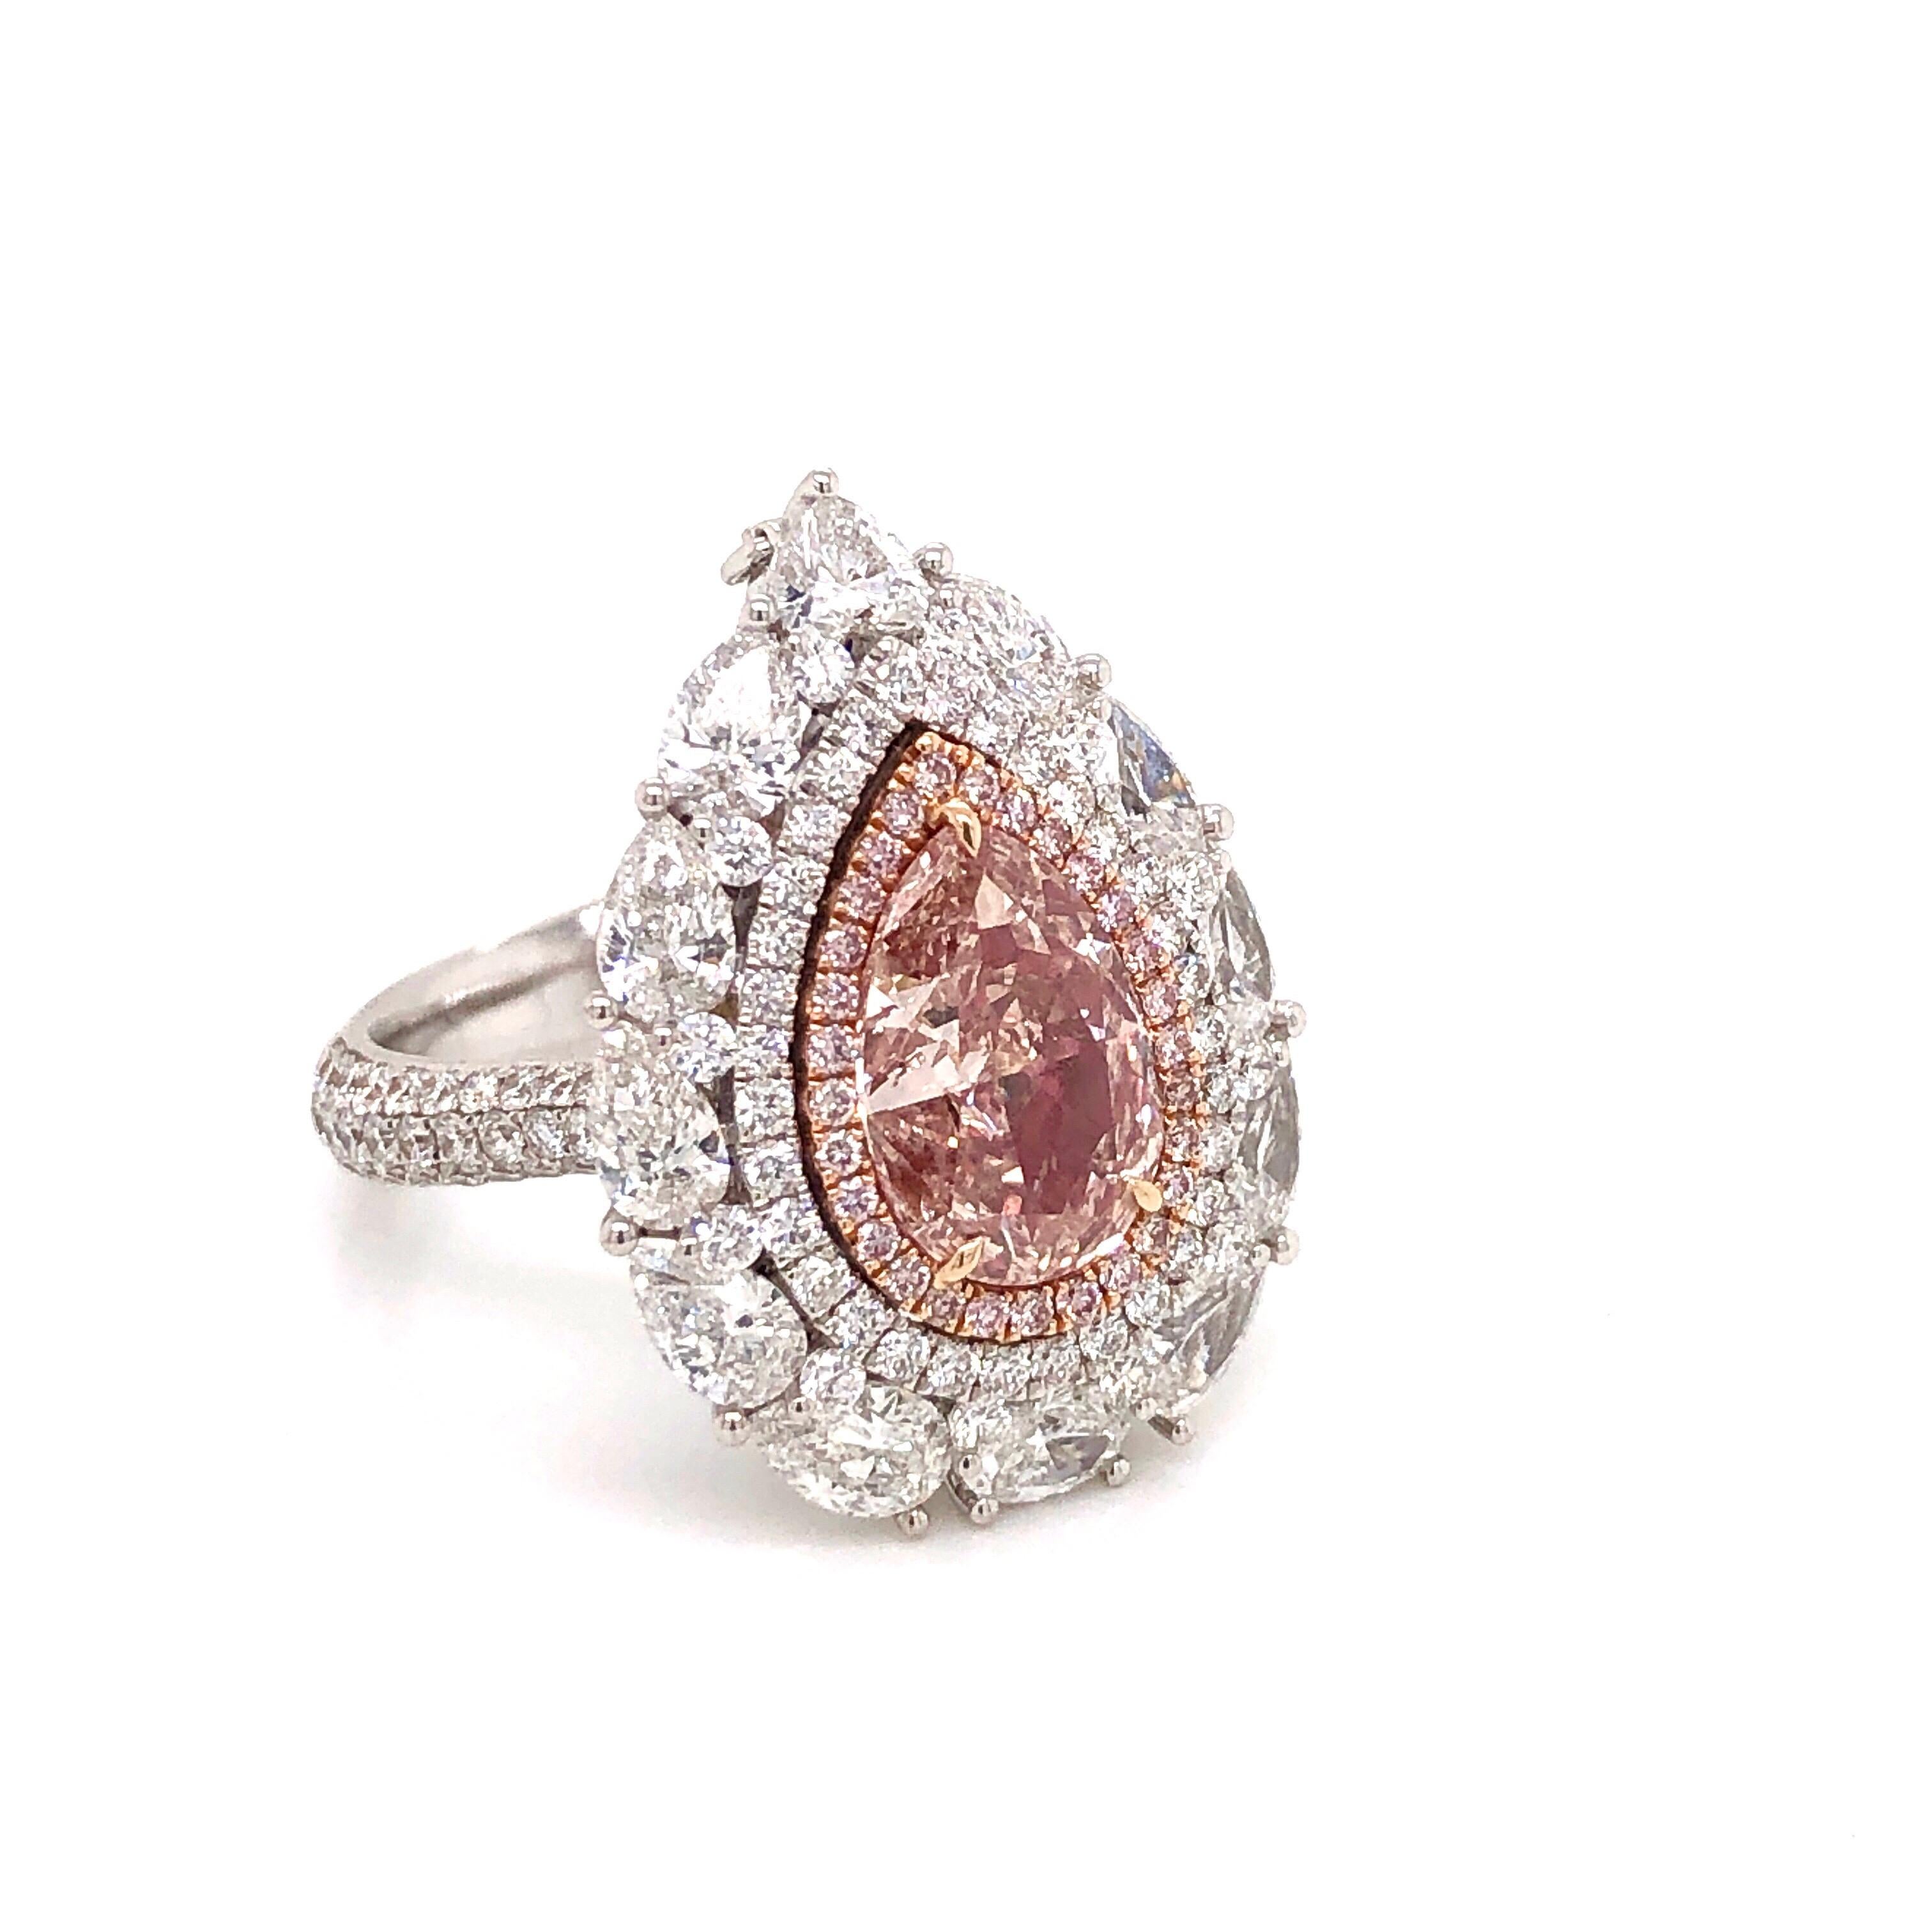 Showcasing a spectacular GIA certified 2.00 Carat Natural fancy brown pink diamond center with excellent saturation throughout. The clarity is si1 and an exceptionally clean diamond. Simply send us a message to request a copy of the GIA report. A